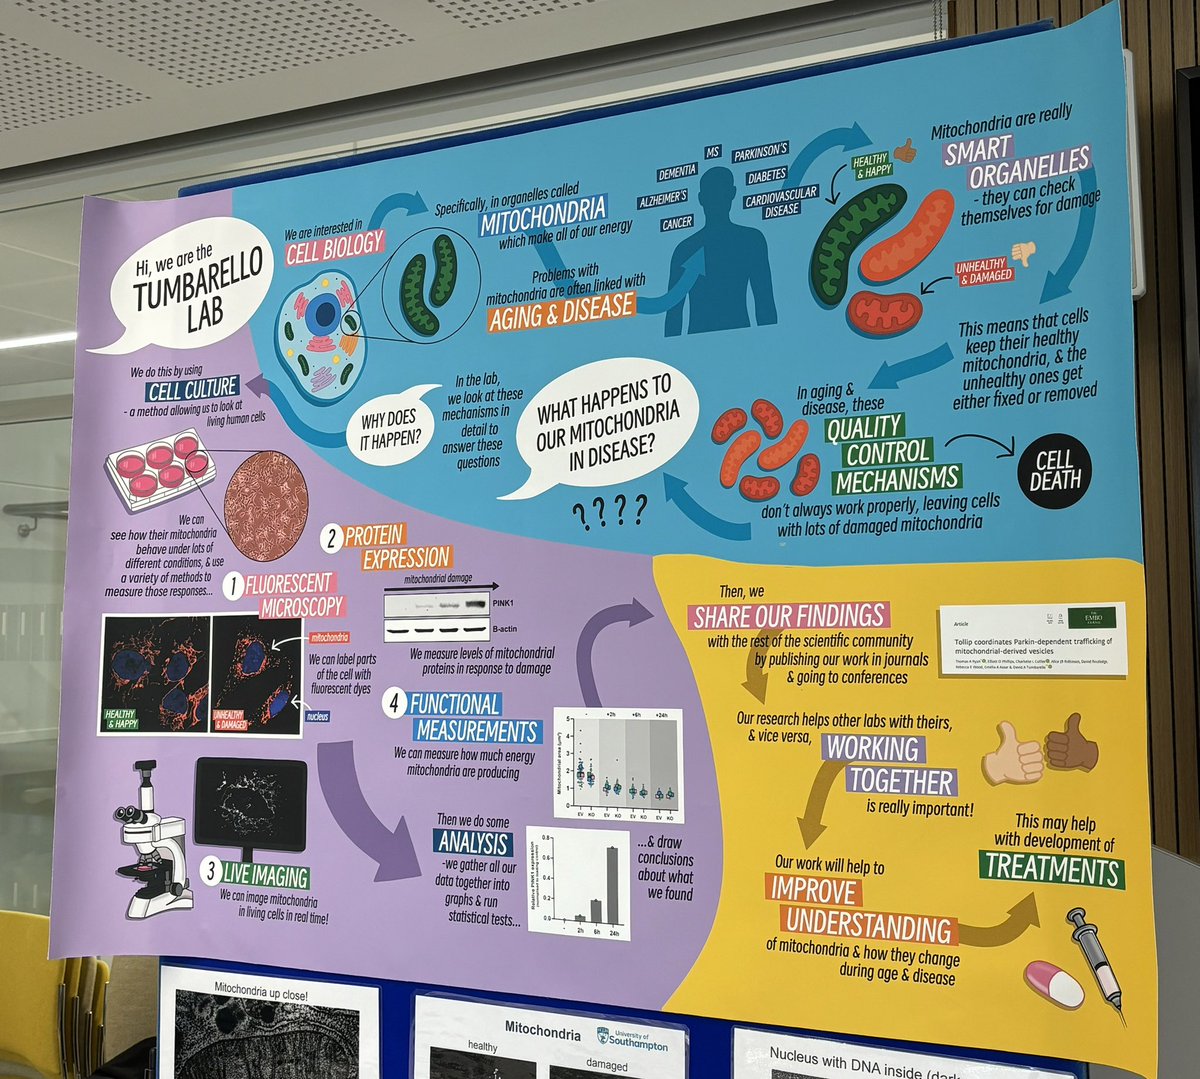 Had a great time sharing cell biology with the public at #SOTSEF over the weekend 🤩 A very rewarding day with lots of engagement from people of all ages wanting to learn about our cells & their mitochondria⚡️

@unisouthampton @UoS_Engagement @sotonbiosci